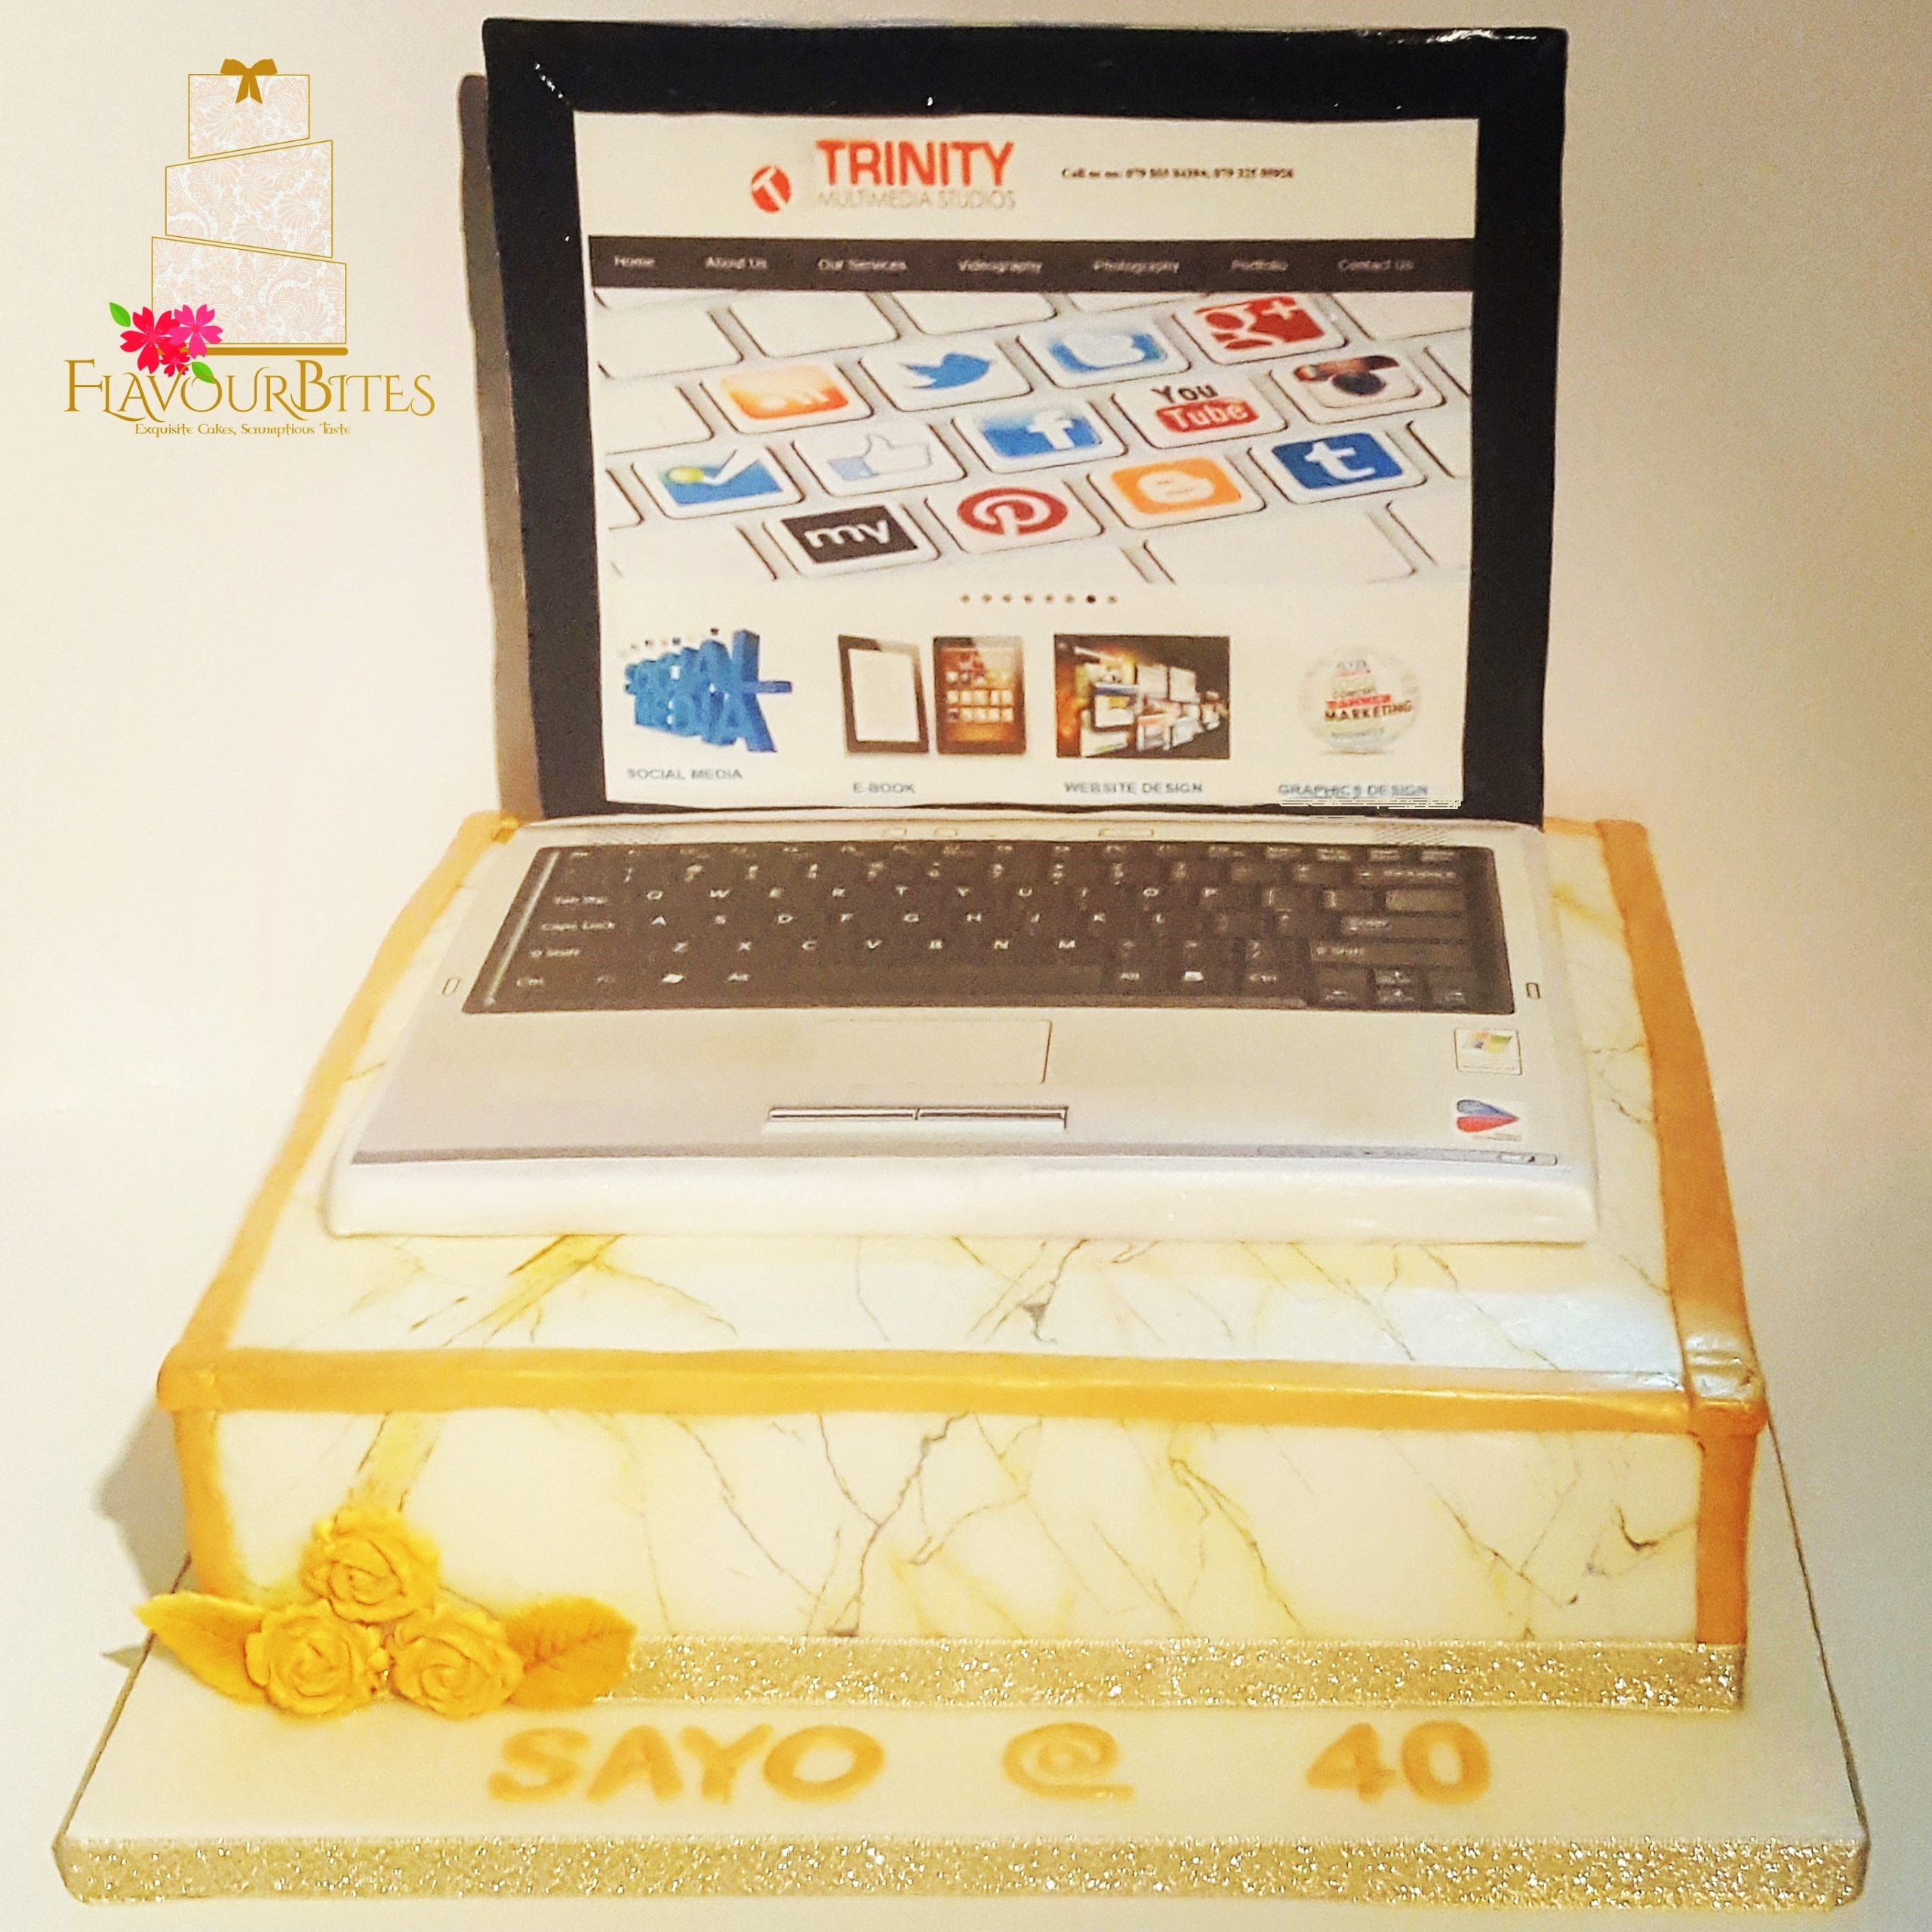 Laptop Cake | Novelty Laptop cake ordered by a Mum for her a… | Flickr